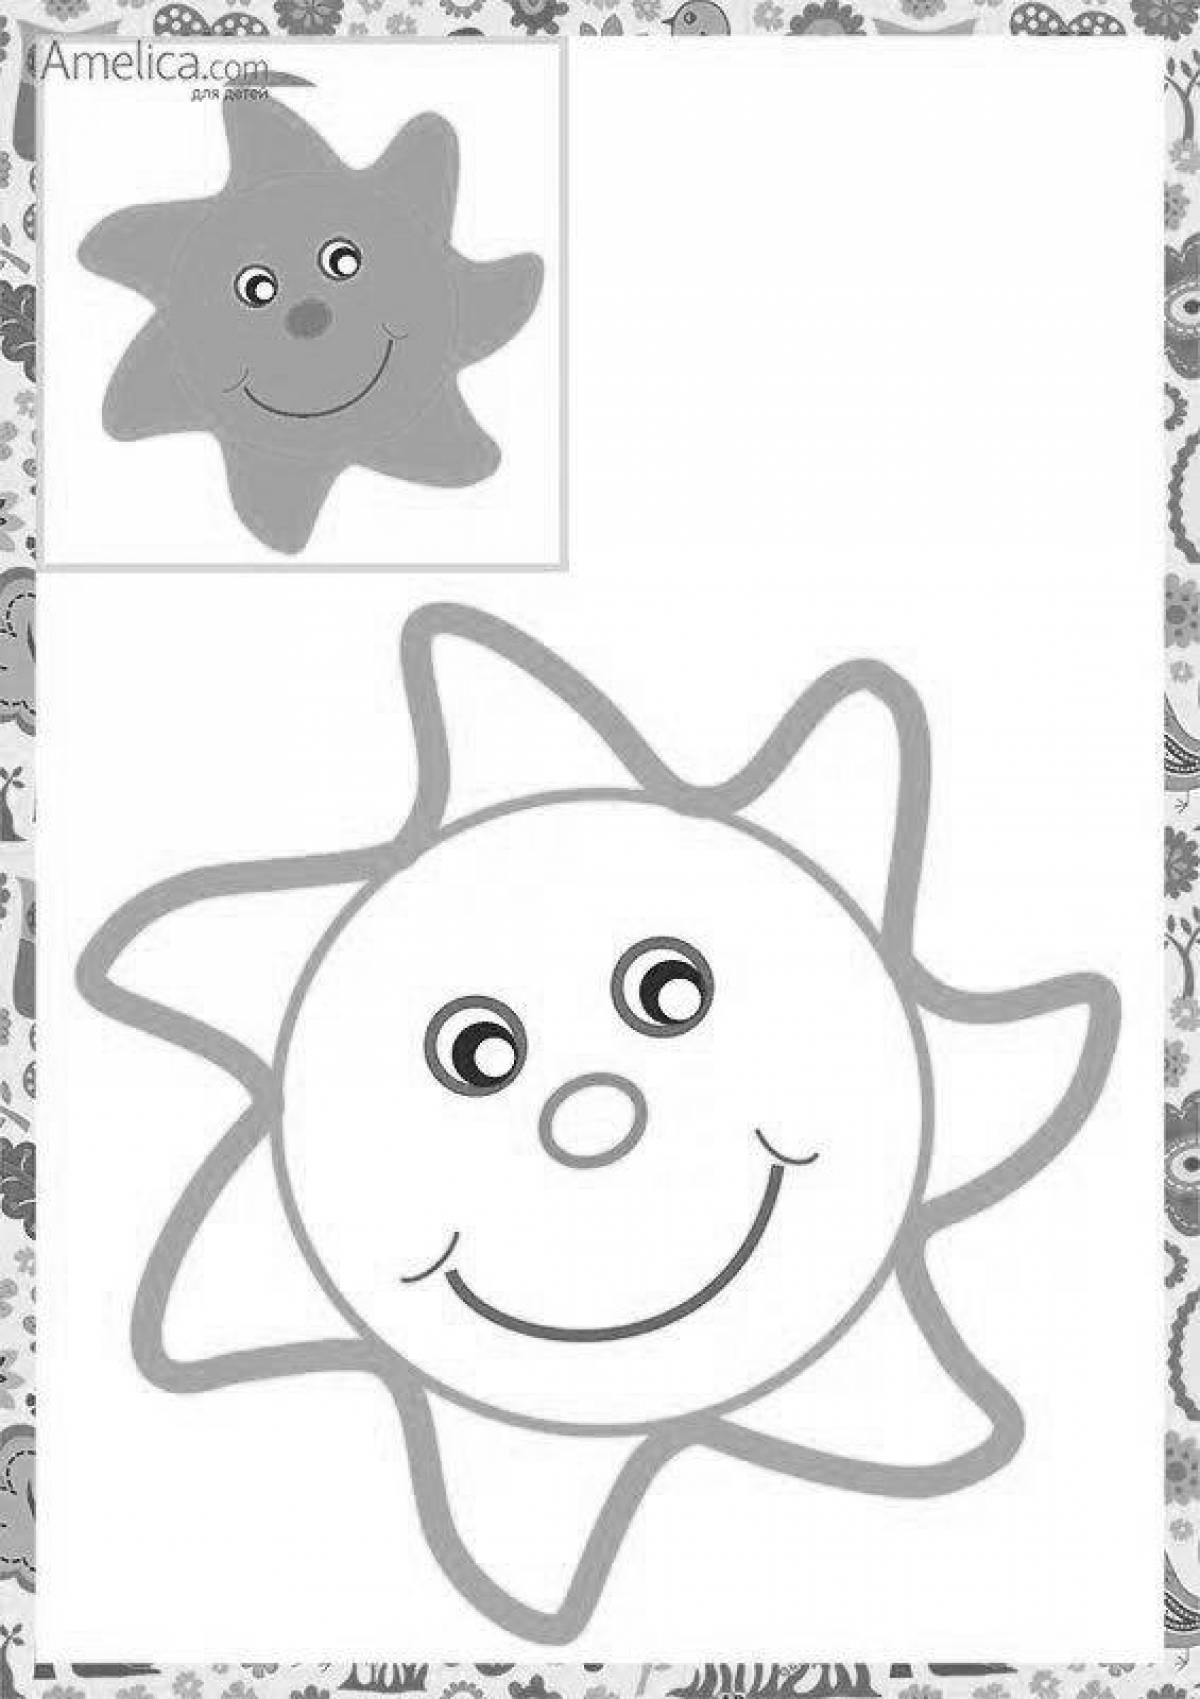 Fun coloring book sun for 2-3 year olds